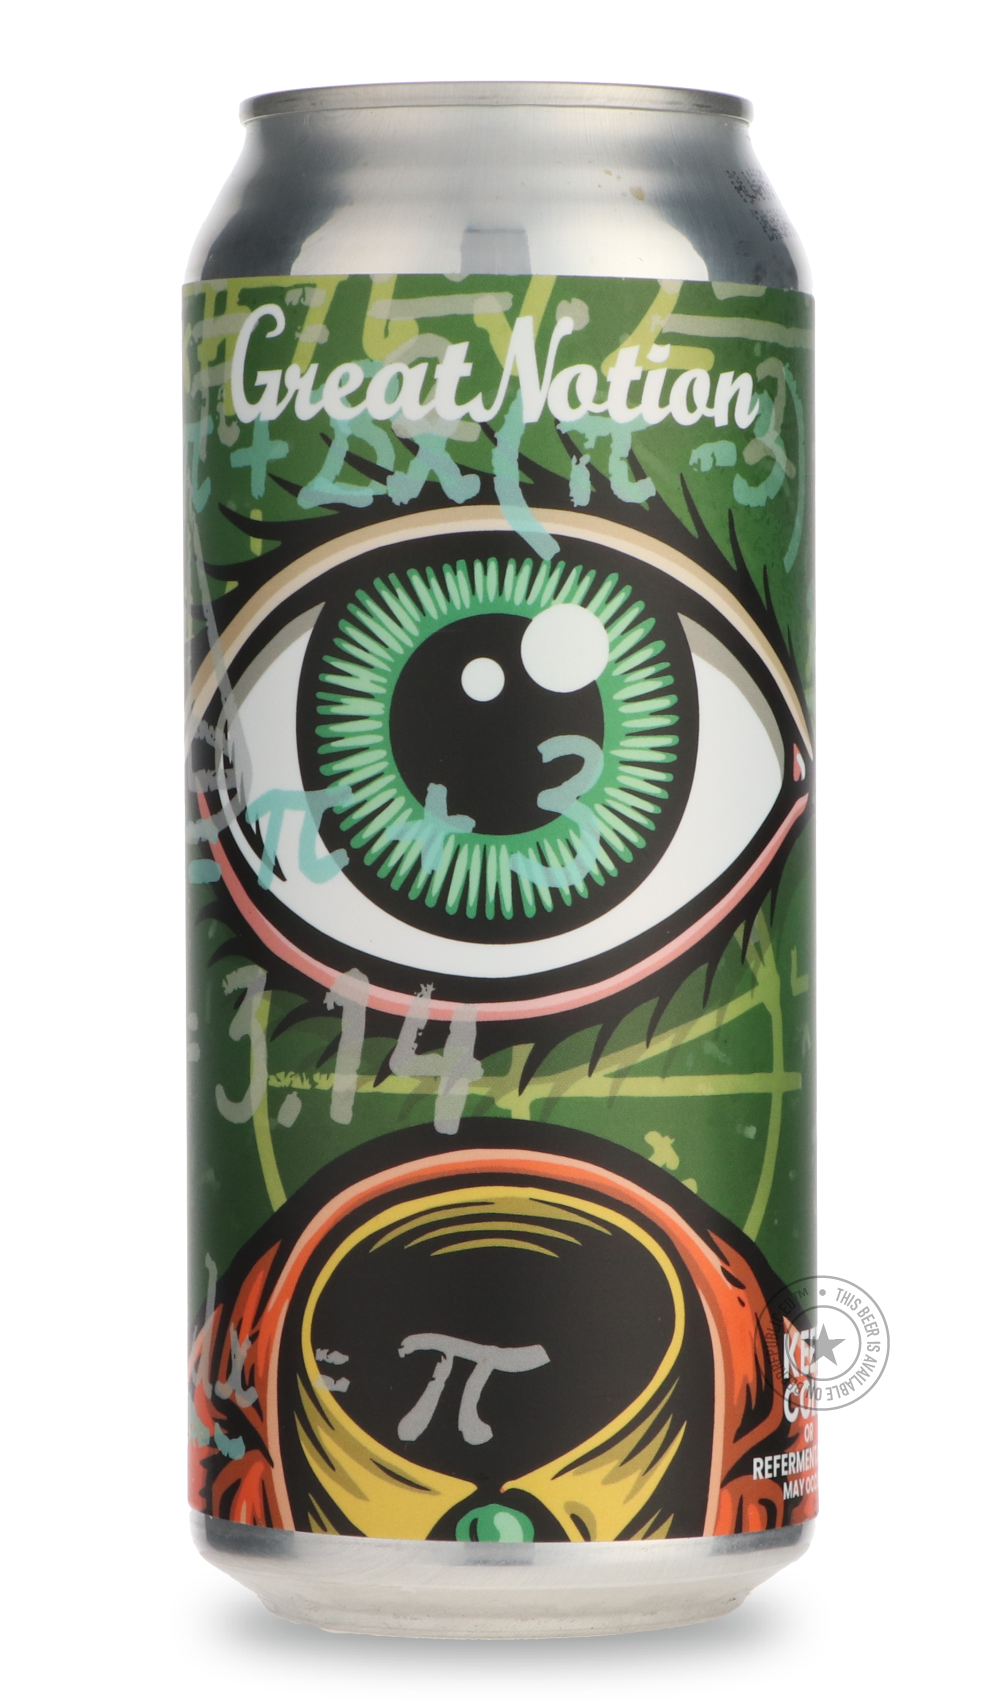 -Great Notion- Luminous Pi-Sour / Wild & Fruity- Only @ Beer Republic - The best online beer store for American & Canadian craft beer - Buy beer online from the USA and Canada - Bier online kopen - Amerikaans bier kopen - Craft beer store - Craft beer kopen - Amerikanisch bier kaufen - Bier online kaufen - Acheter biere online - IPA - Stout - Porter - New England IPA - Hazy IPA - Imperial Stout - Barrel Aged - Barrel Aged Imperial Stout - Brown - Dark beer - Blond - Blonde - Pilsner - Lager - Wheat - Weizen